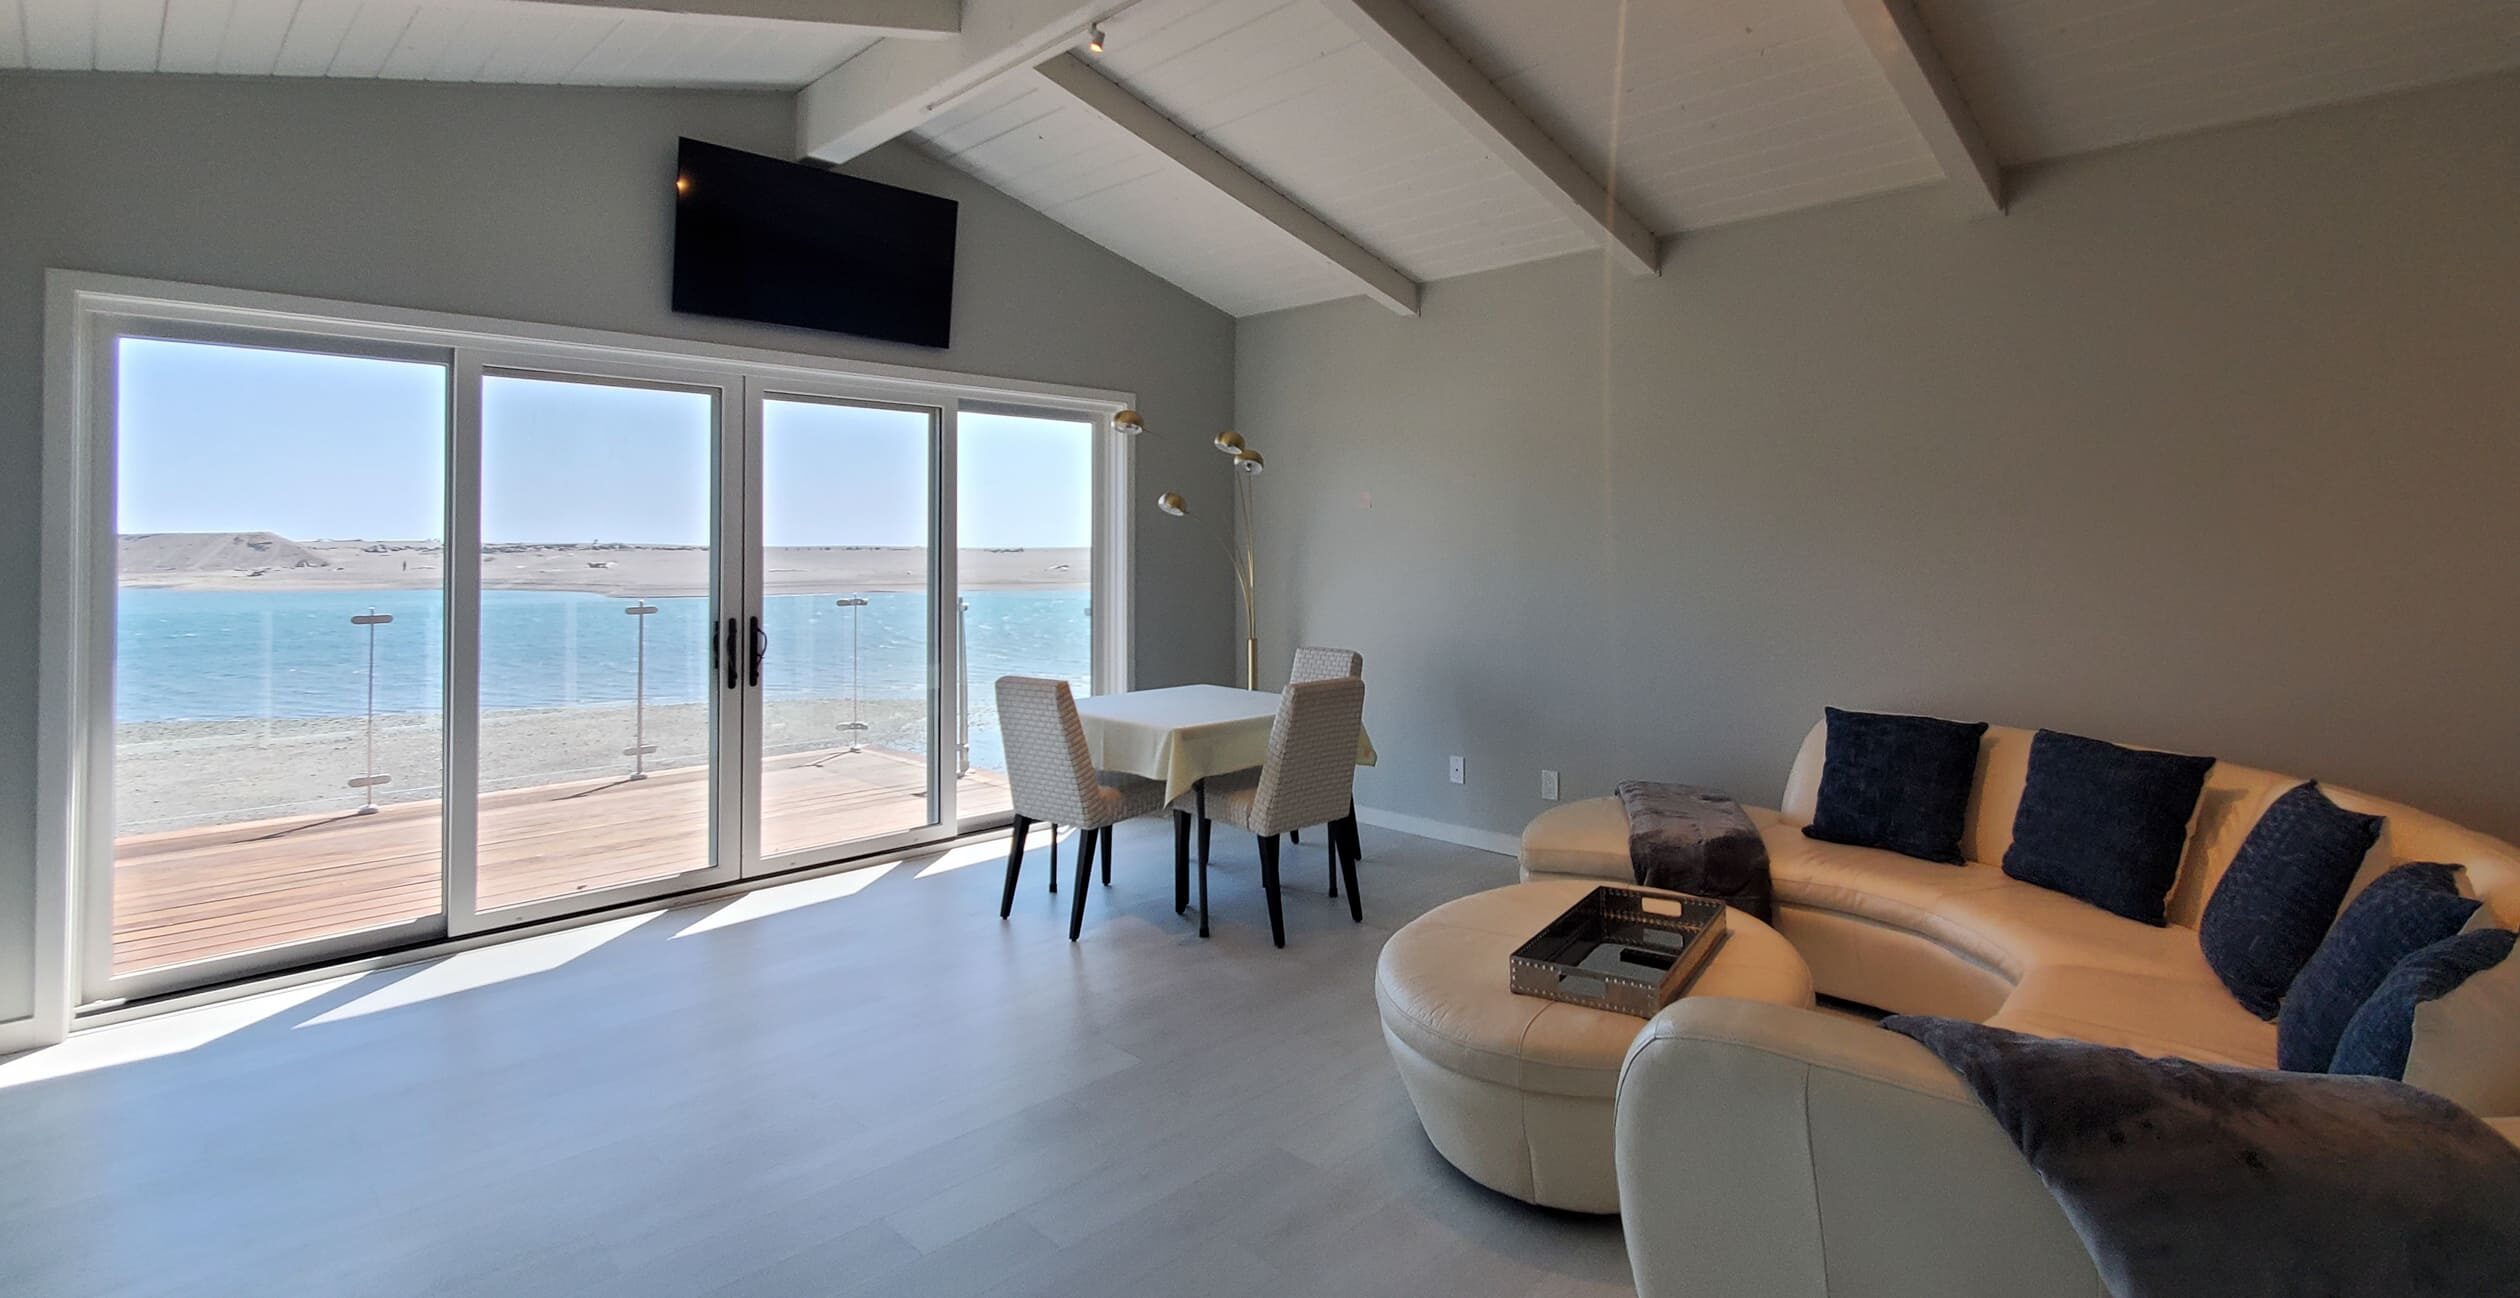 Ocean view living room at the Oceana House - Jenner Vacation Rental